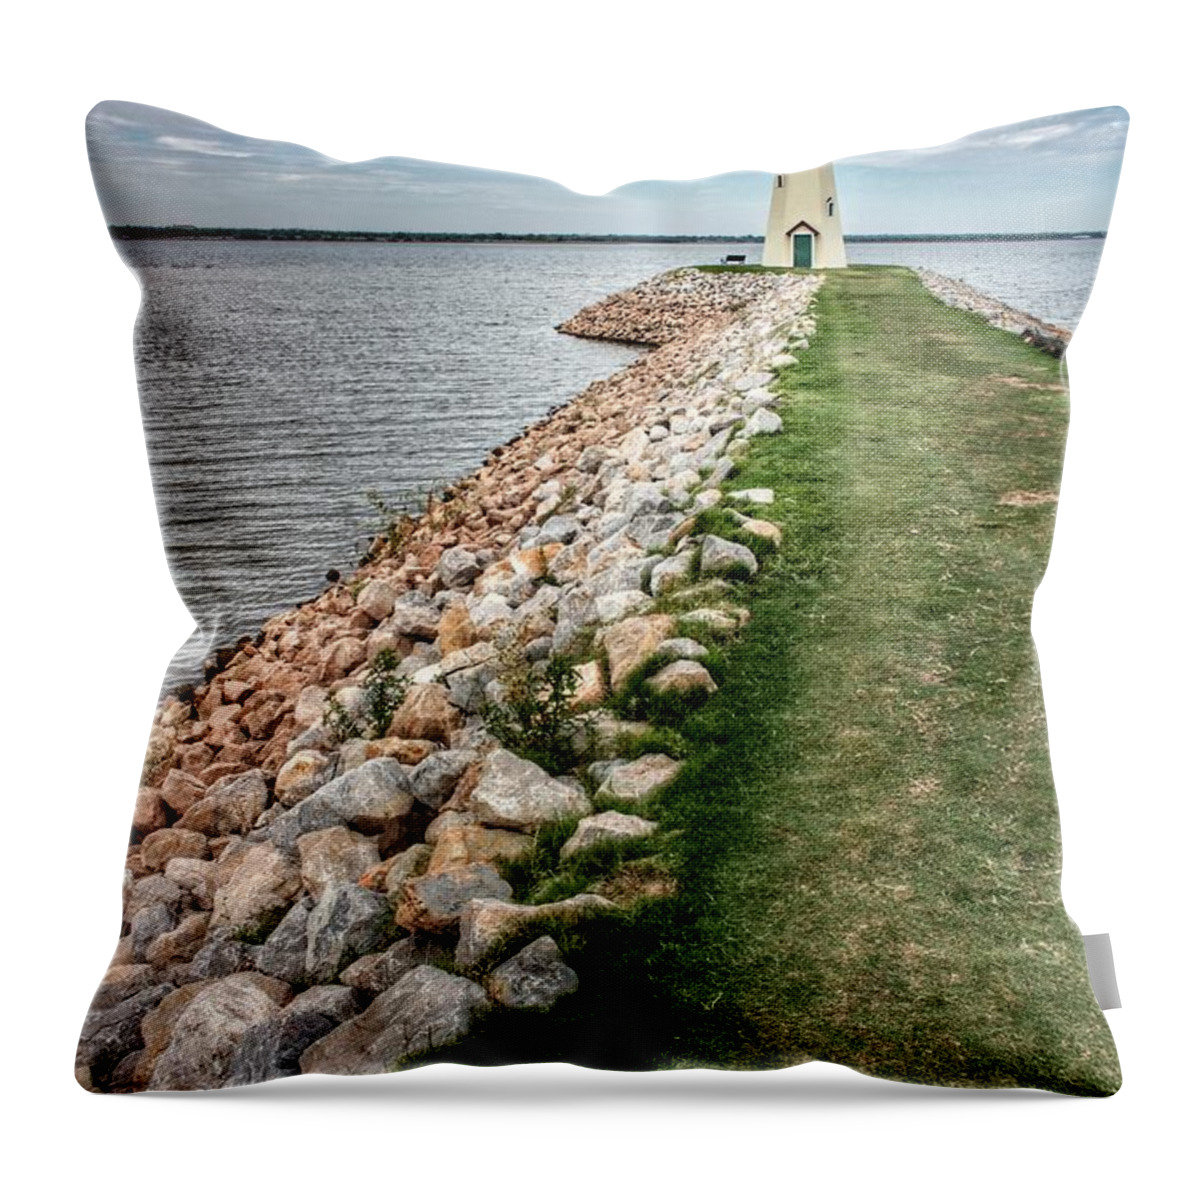 The Path Out To The Lake Hefner Lighthouse In Oklahoma City Throw Pillow featuring the photograph Walking To The Lighthouse by Buck Buchanan